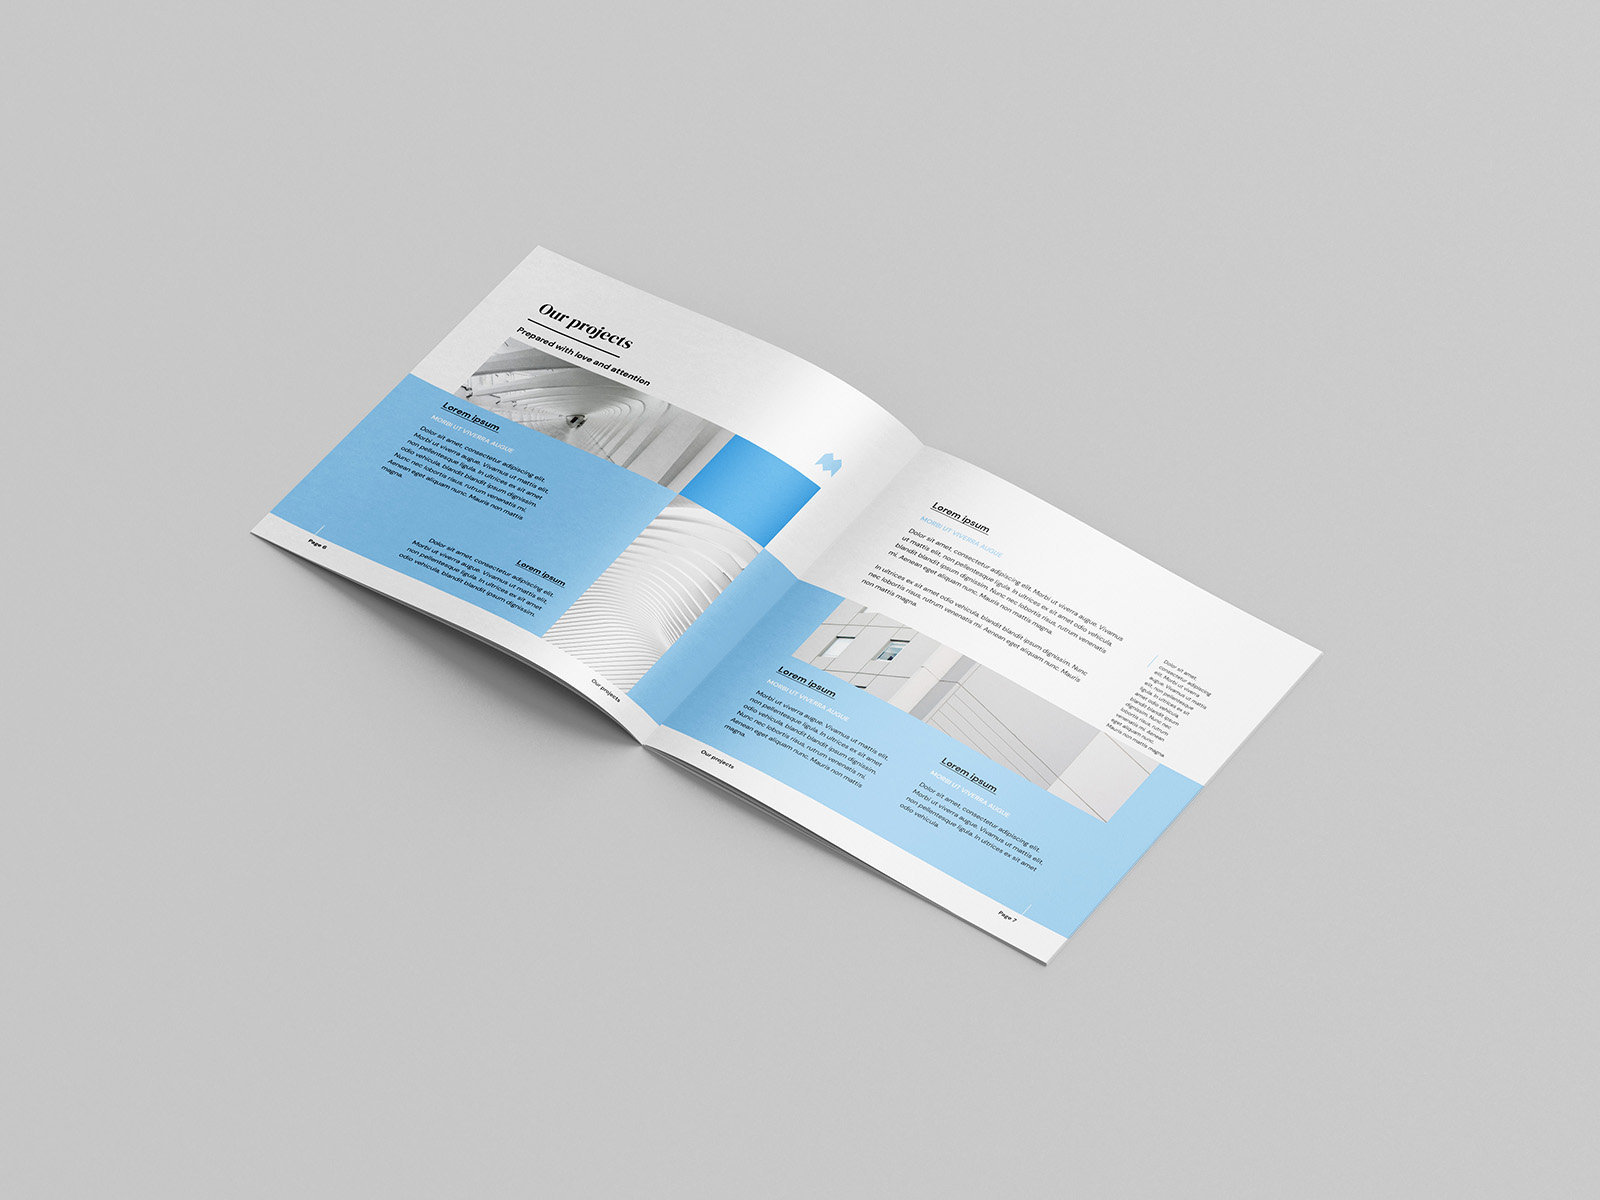 8 Mockups of Thin Square Brochure FREE PSD